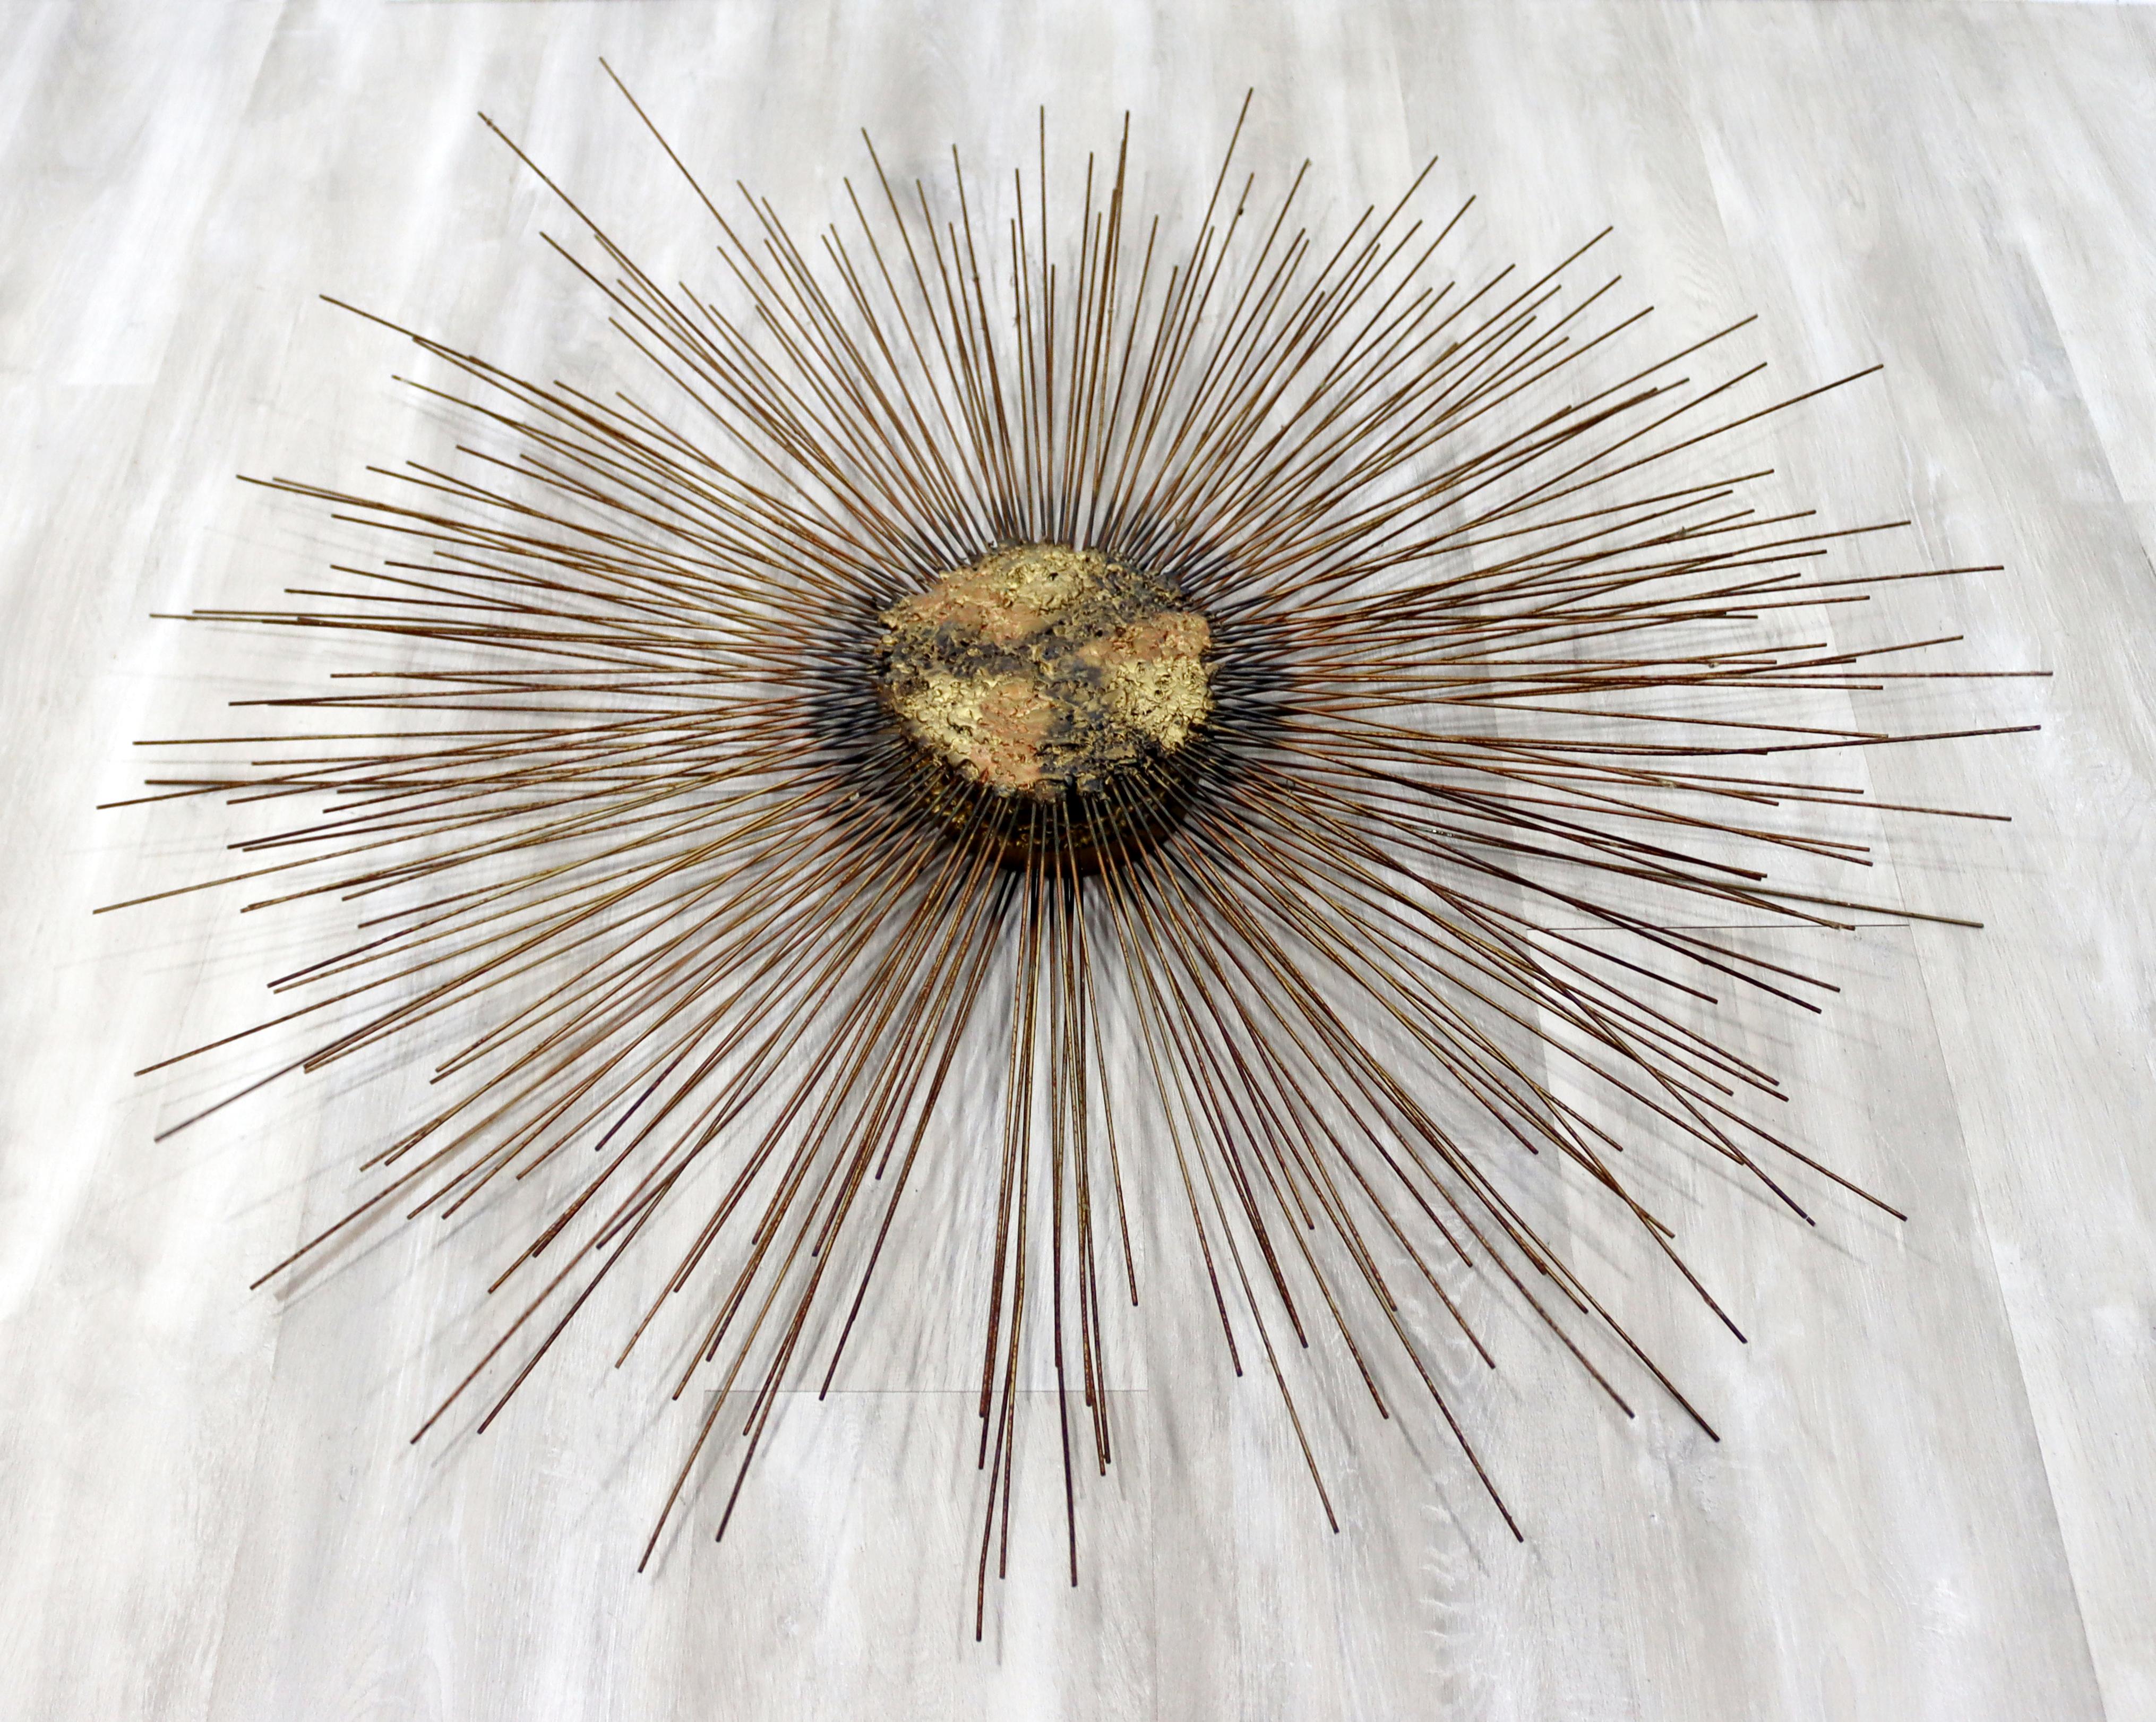 For your consideration is a beautiful, Brutalist, bronze wall sculpture, of a sunburst, circa the 1970s. In excellent condition. The dimensions are 37